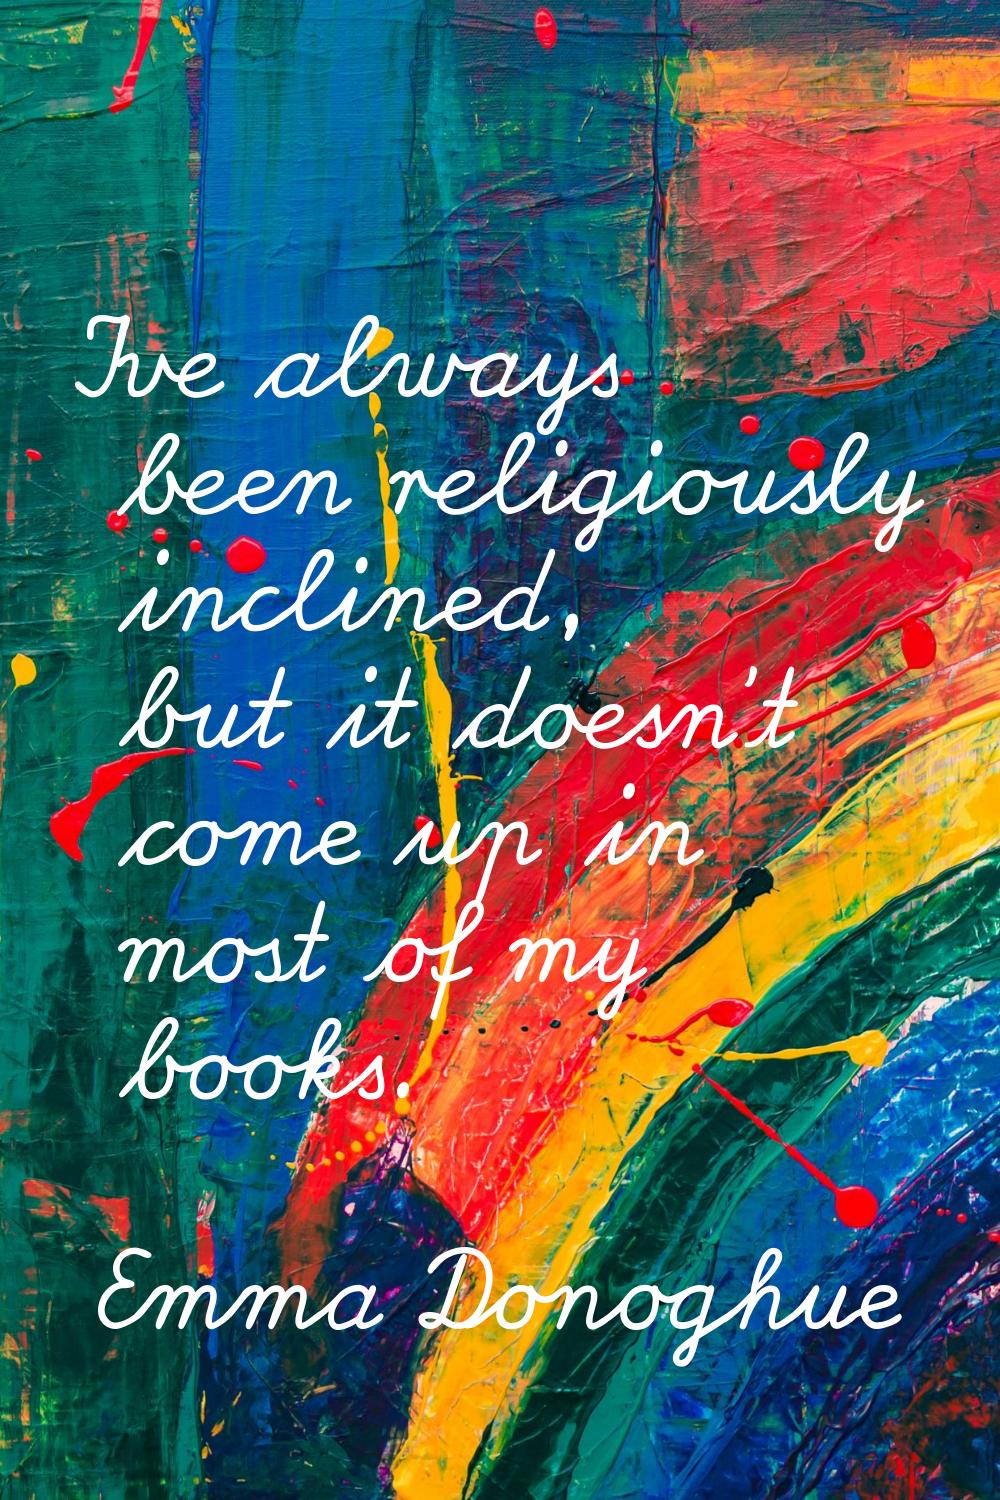 I've always been religiously inclined, but it doesn't come up in most of my books.